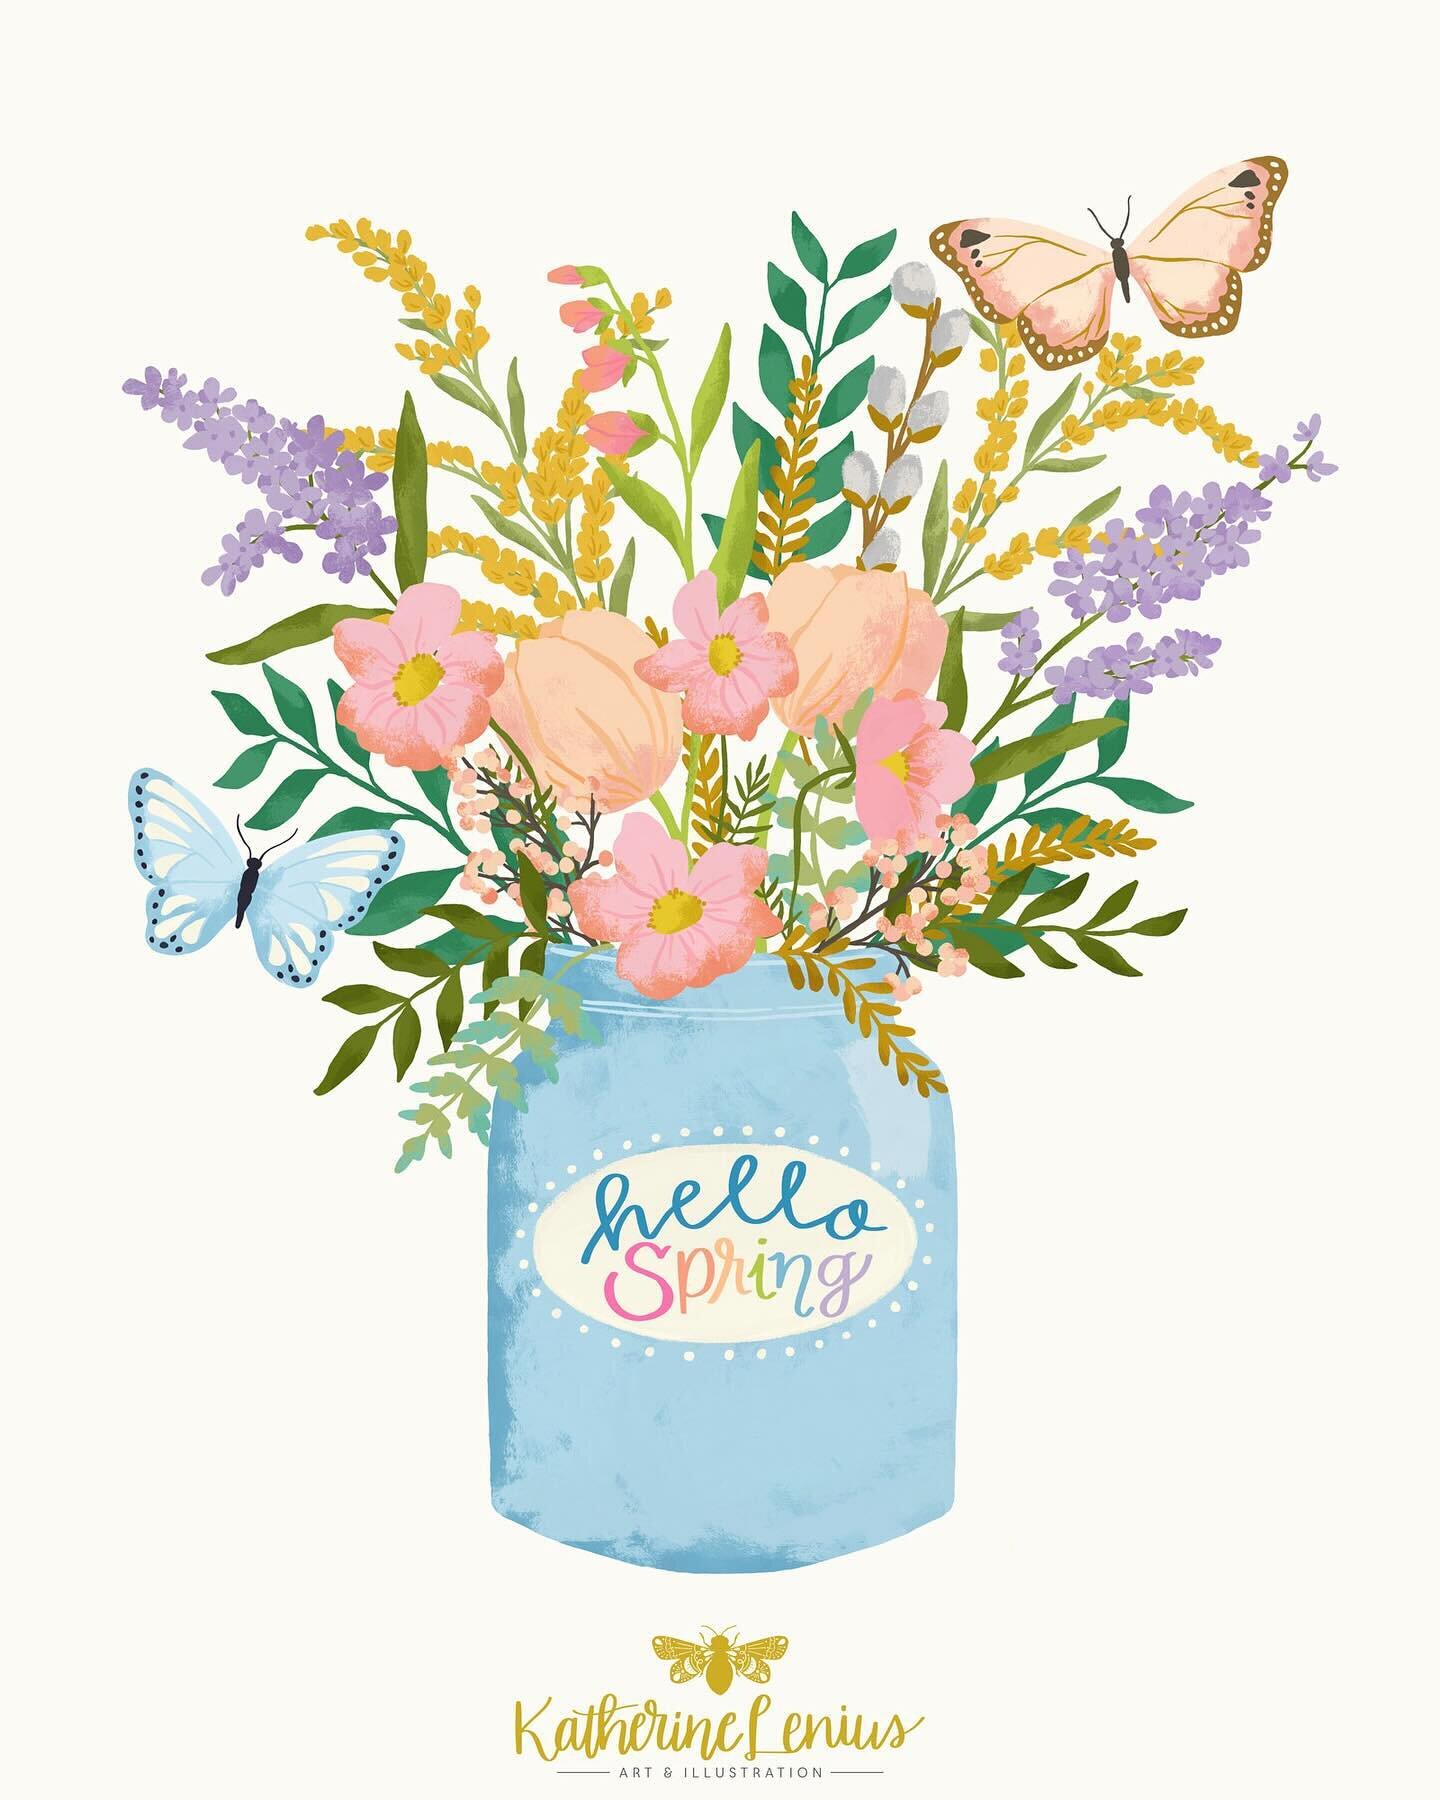 Because it&rsquo;s still snowing up here&hellip; My poor buried daffodils.  #springart #springbouquet #digitalillustration #artlicensing #springpainting #floralillustration #hellospring